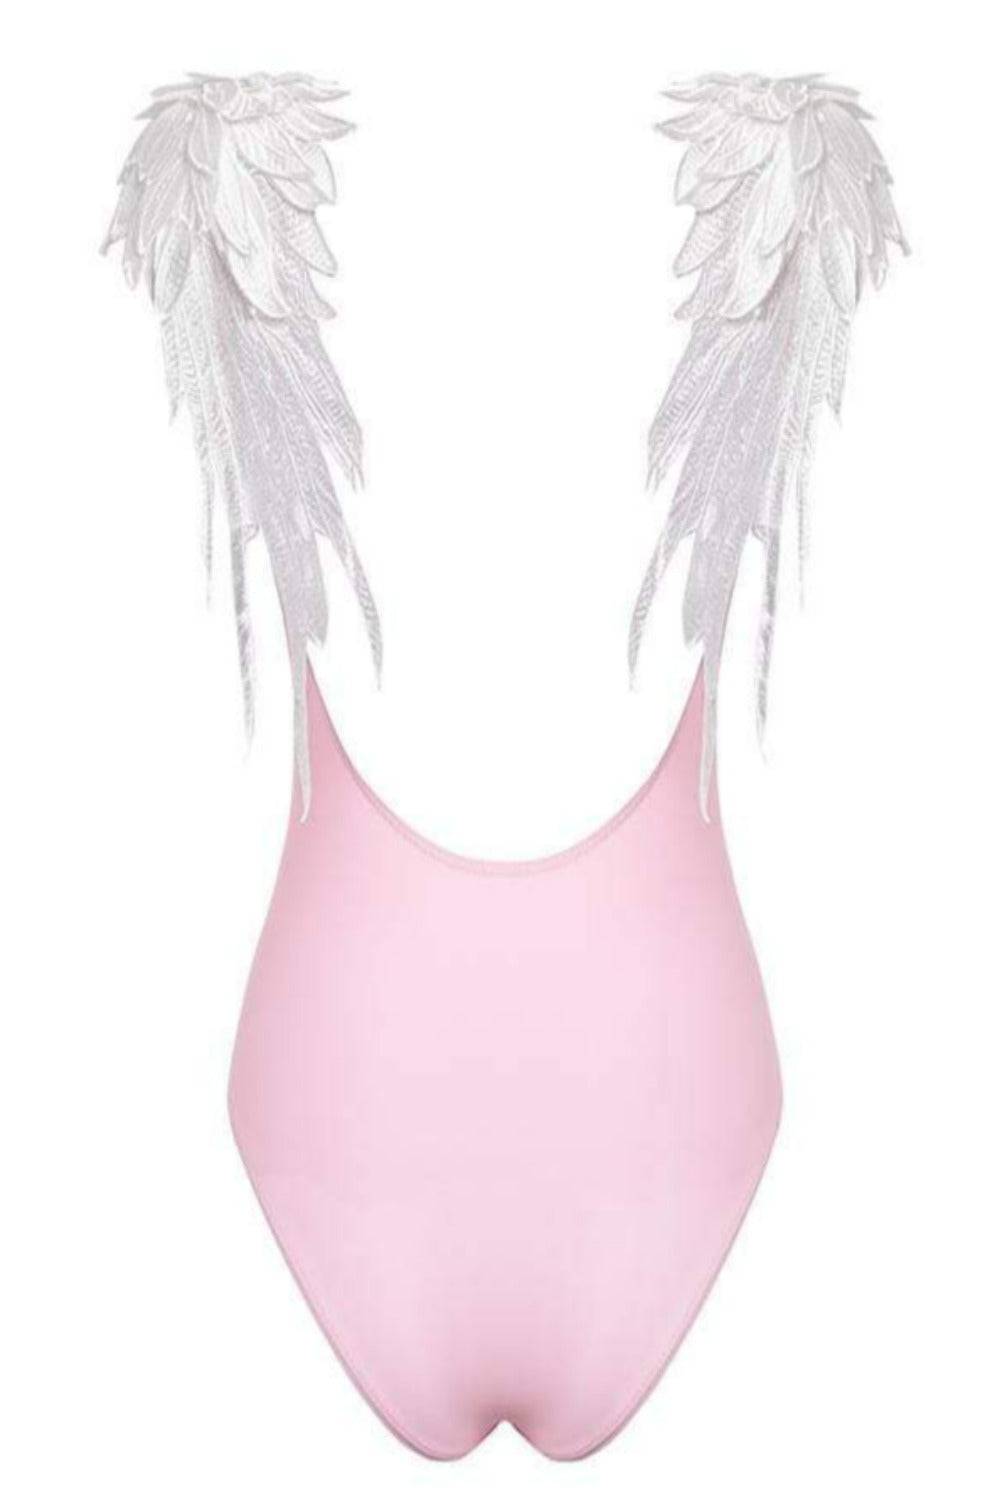 Mommy And Me Swimsuits With Angel Wings - Pink - TGC Boutique - Mom and Daughter Swimsuit